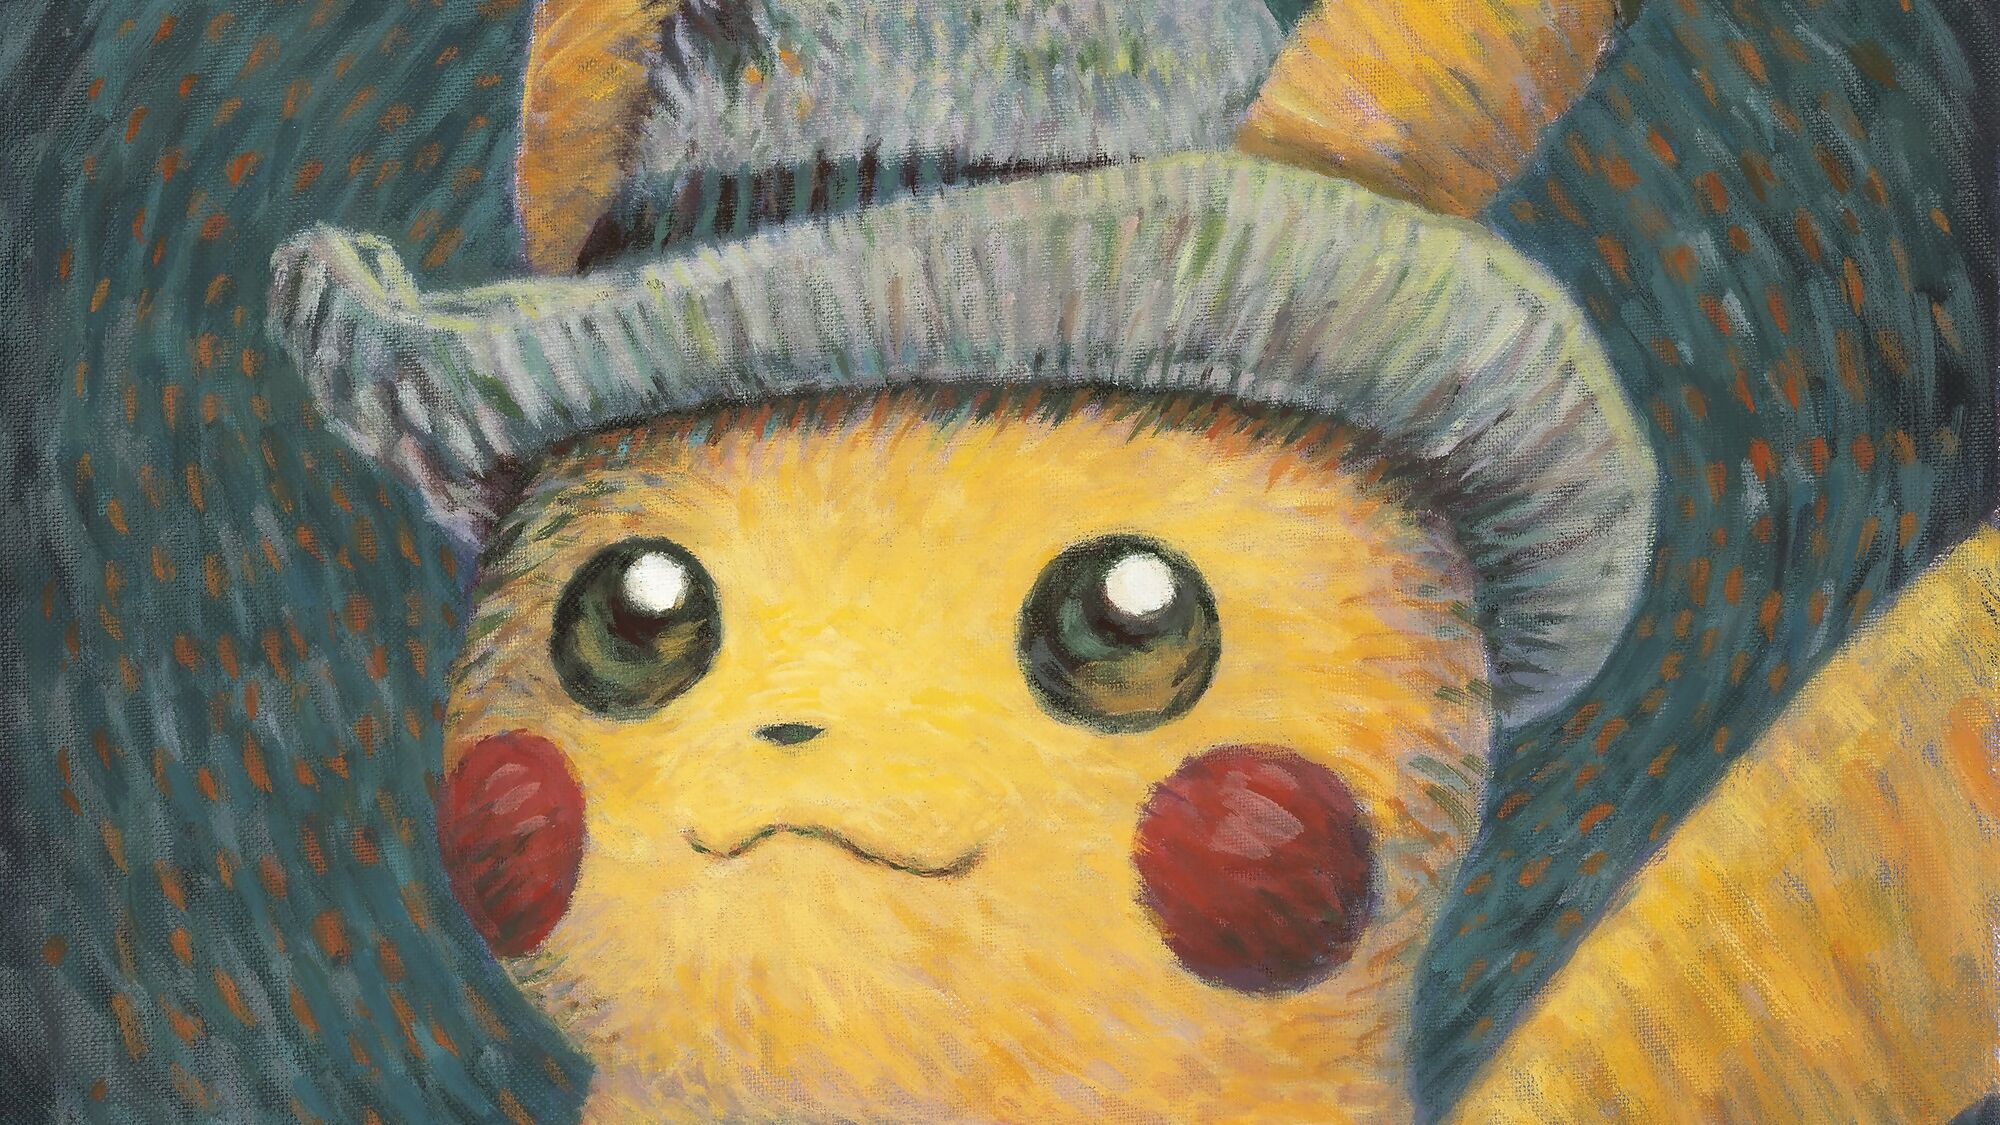 Pikachu inspired by ‘Self-Portrait with Grey Felt Hat’ - part of the Pokémon exhibition at the Van Gogh museum, Amsterdam.